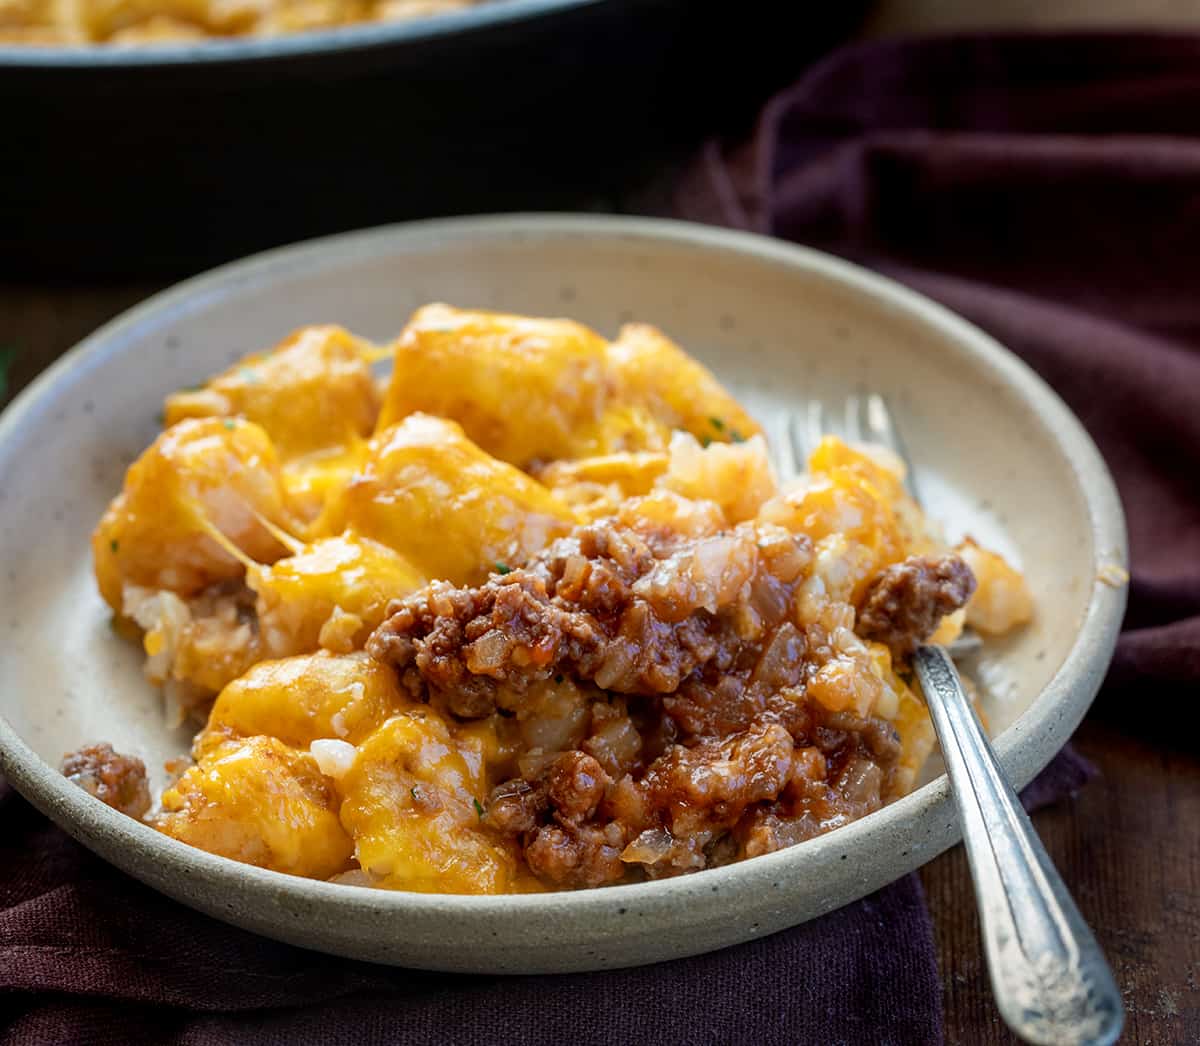 PLate of Sloppy Joe Tater Tot Casserole with a fork.